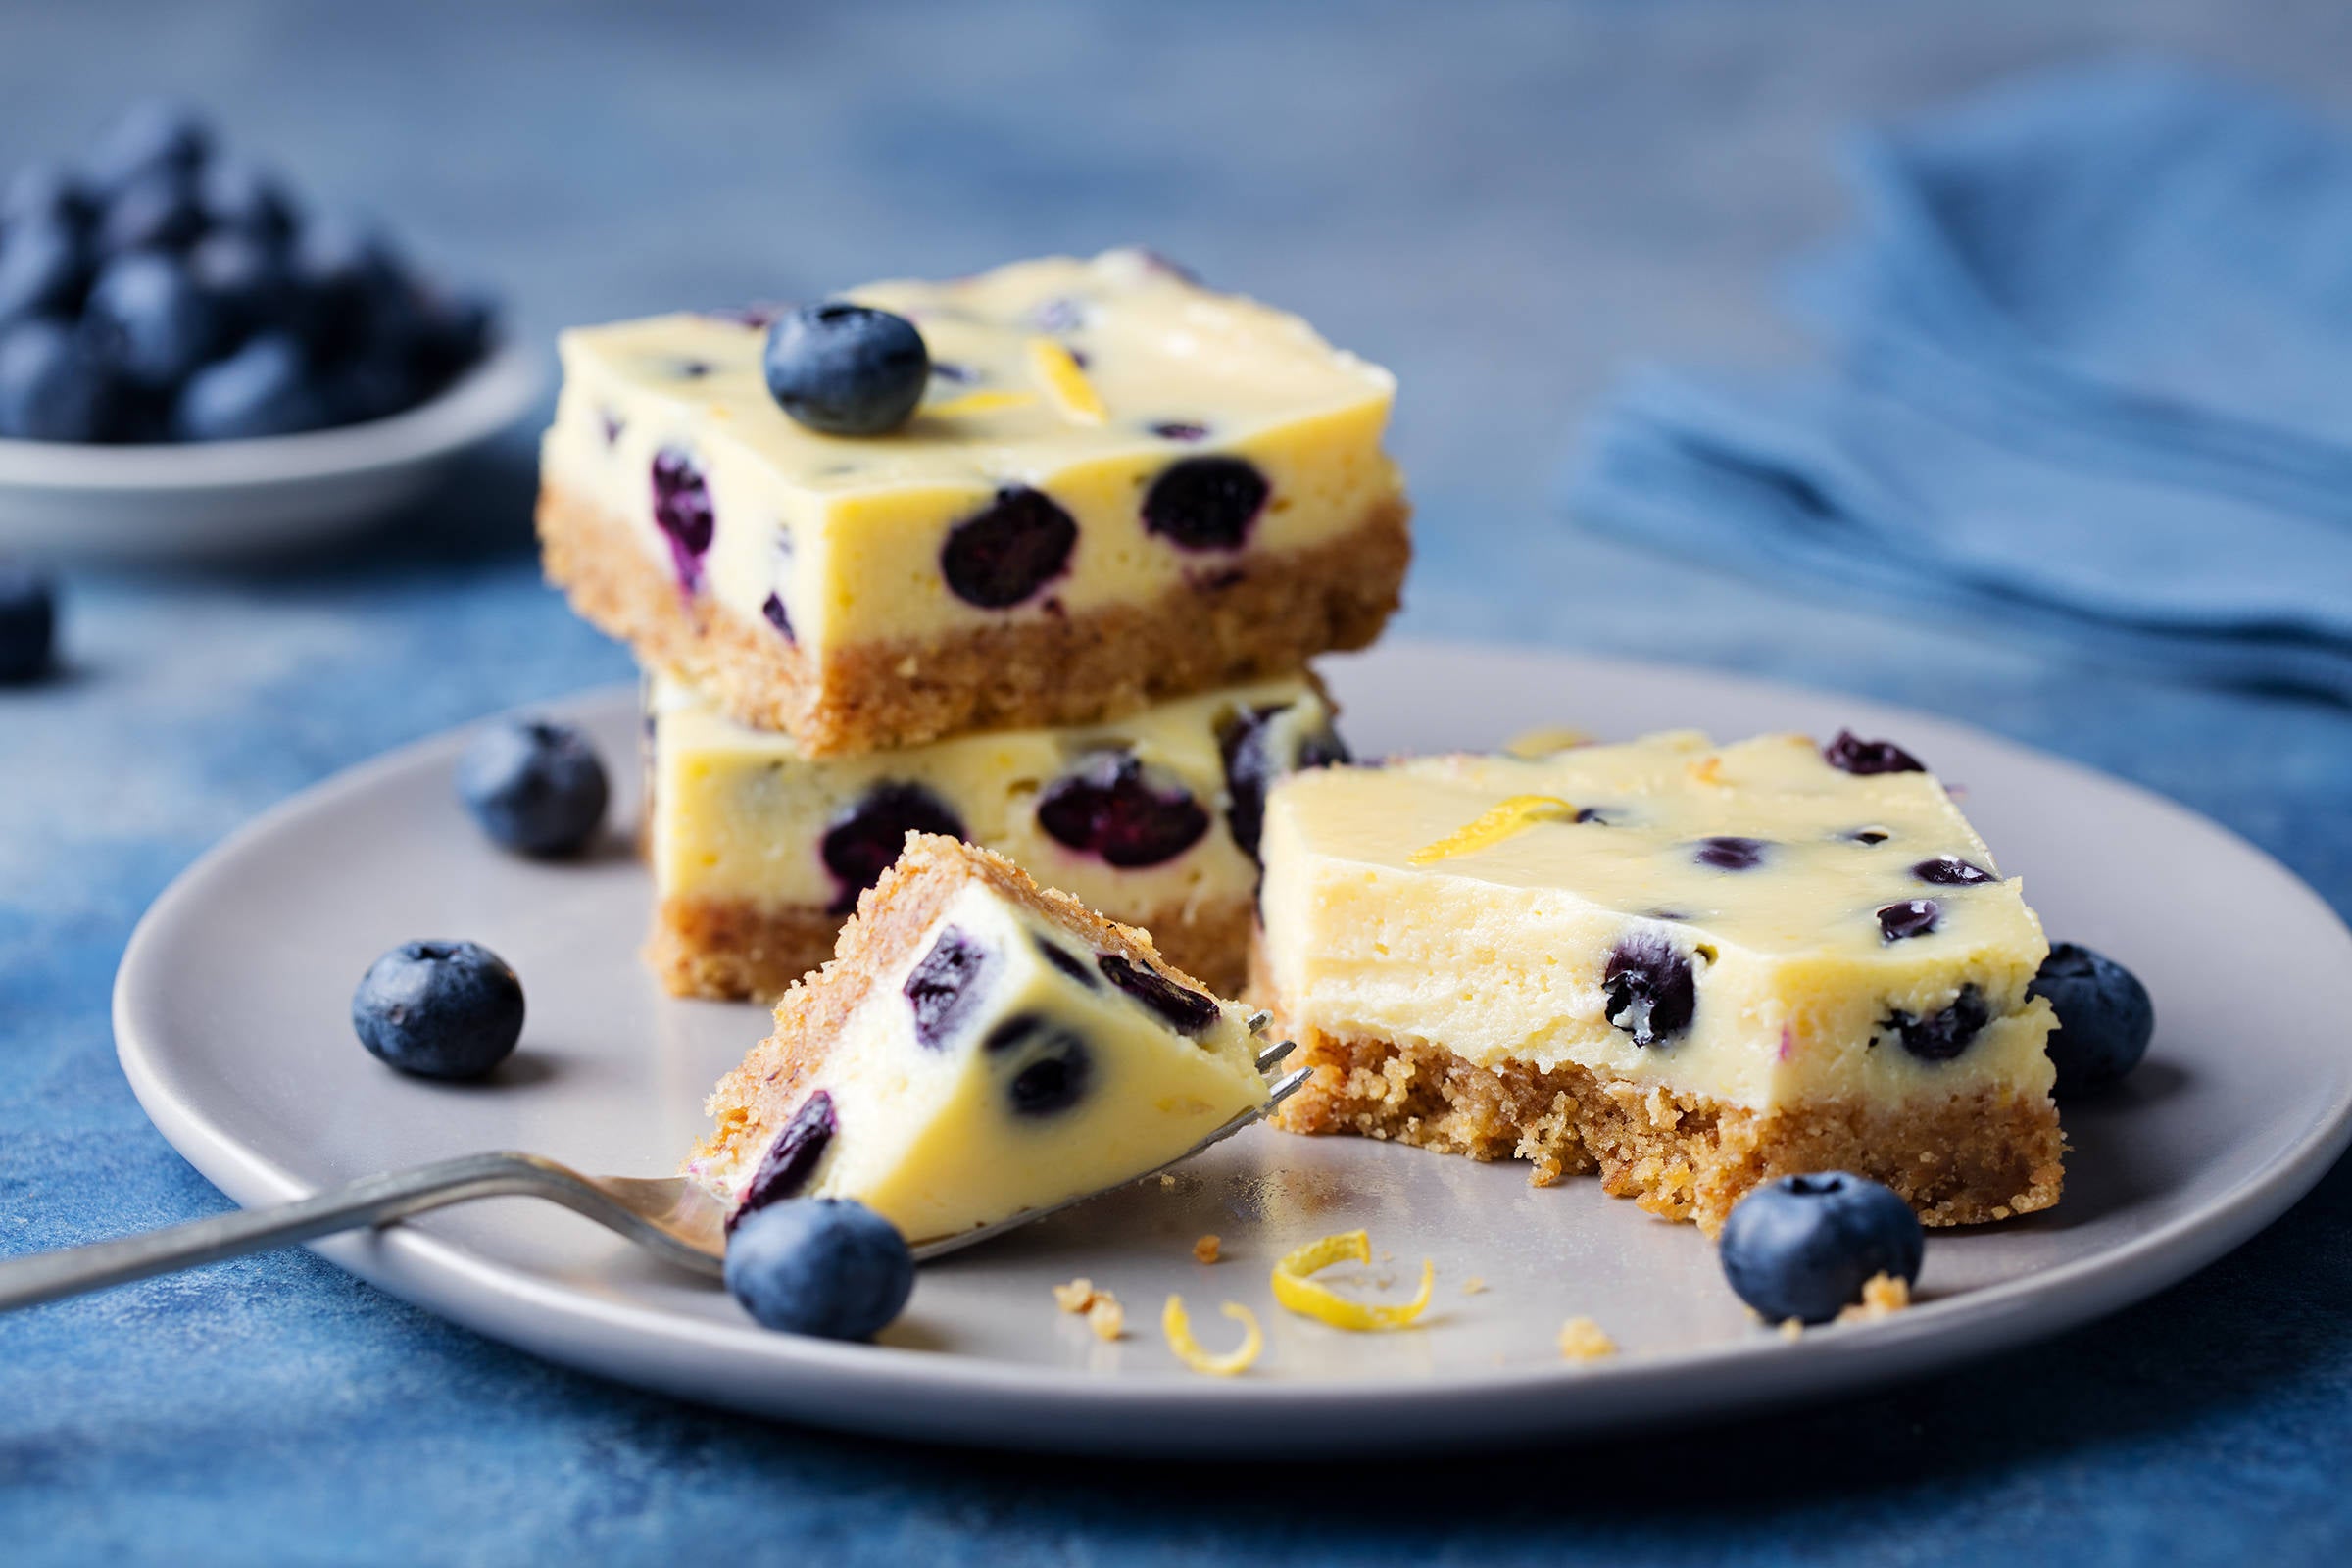 Blueberry bars, cake, cheesecake on a grey plate on blue stone background